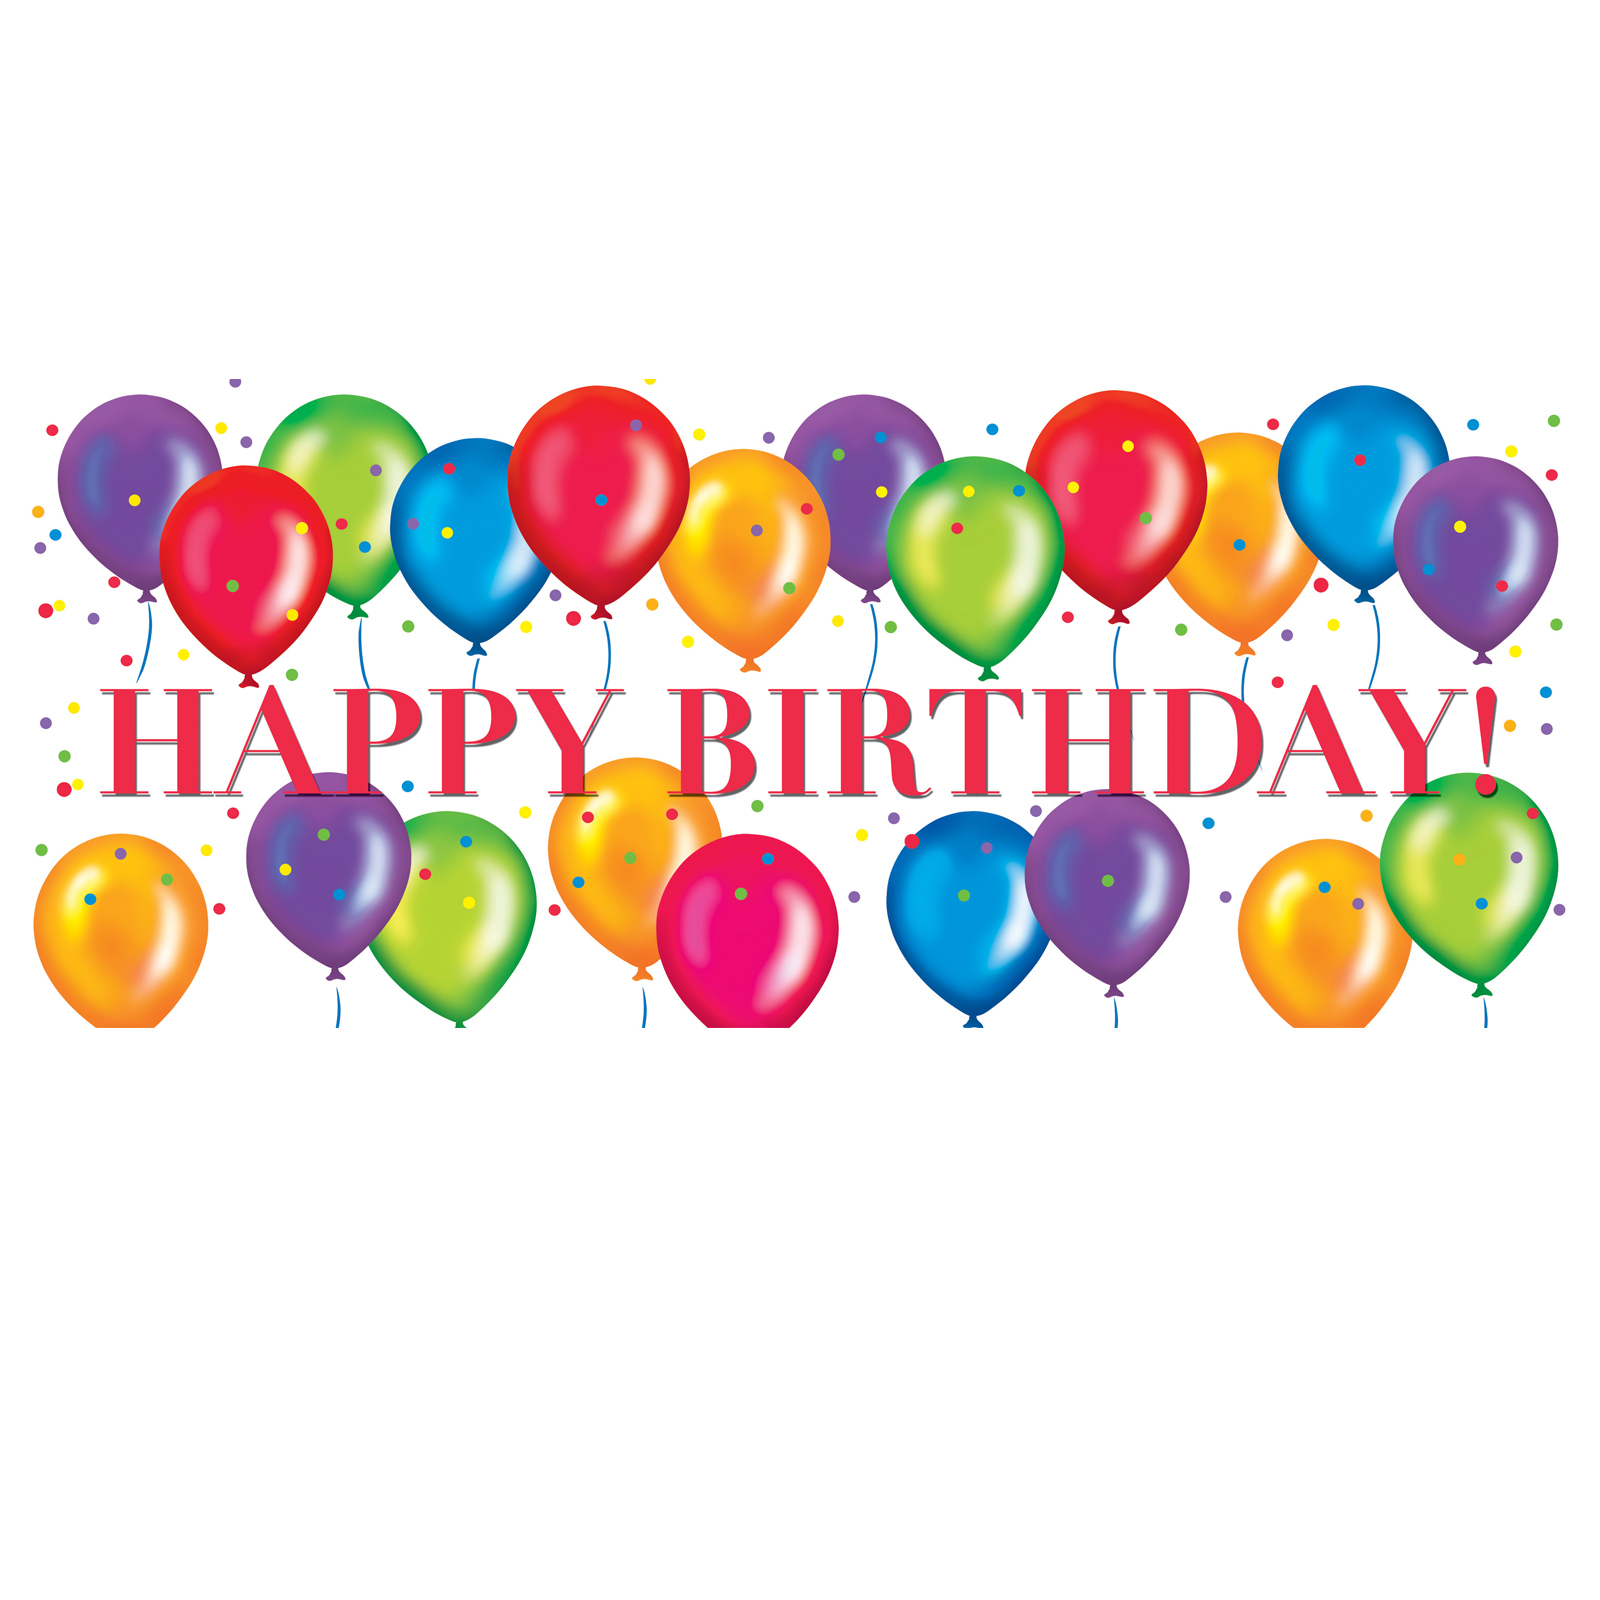 Background On BirtHDay Wallpaper And Image Pictures